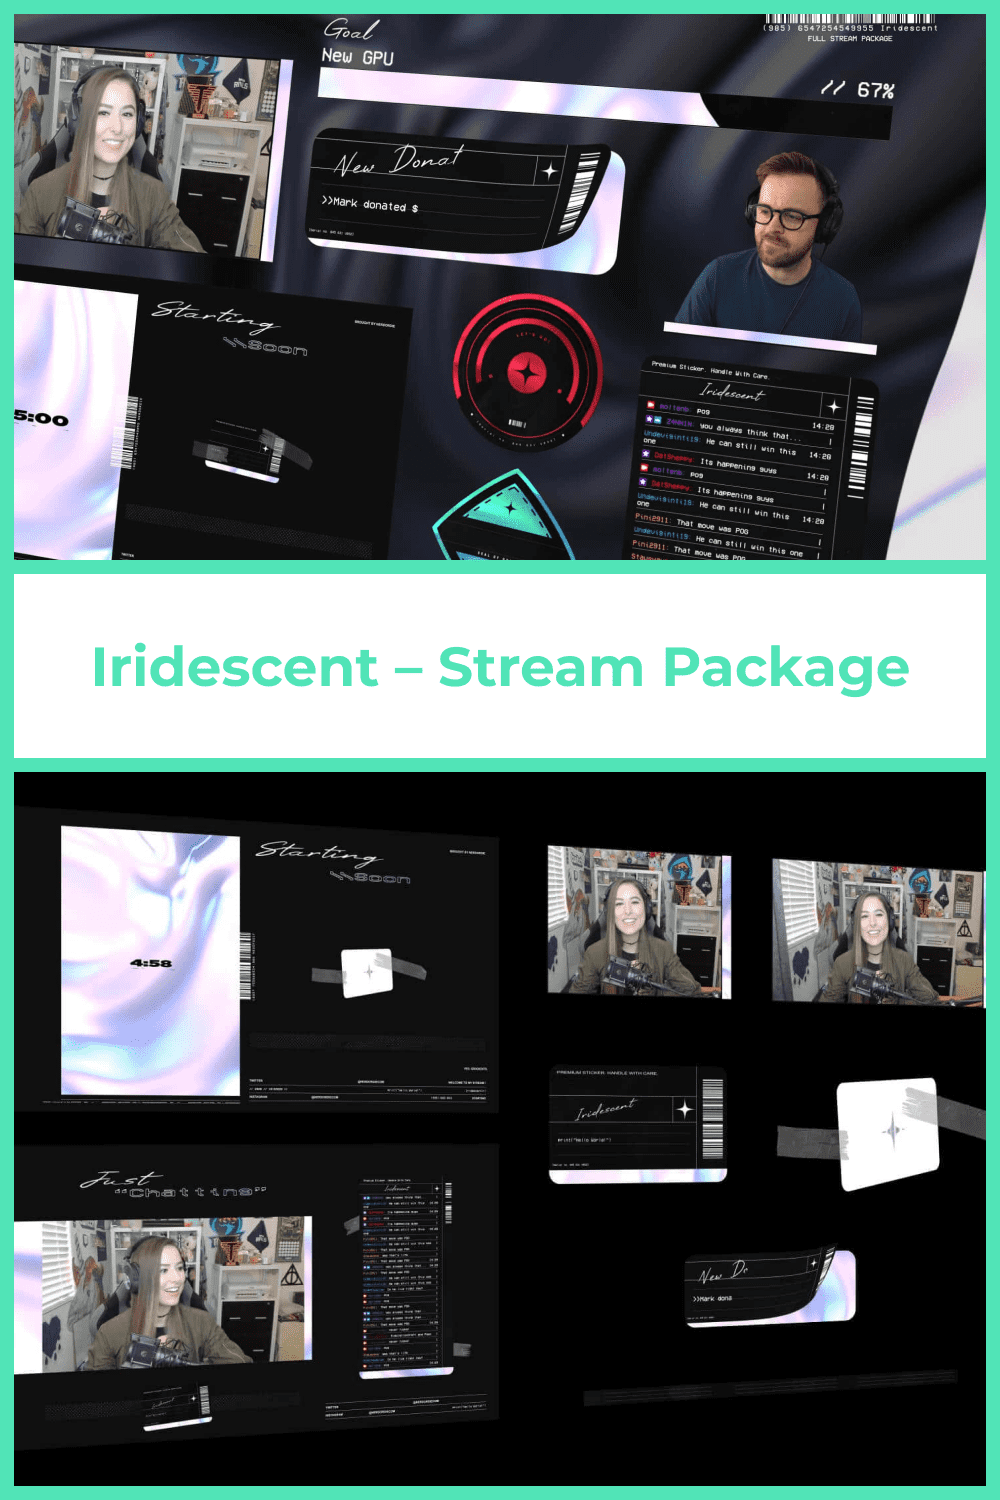 Ultra contemporary design, smooth material background loops and loads of color options – Iridescent is at the apex of high-quality stream packages.